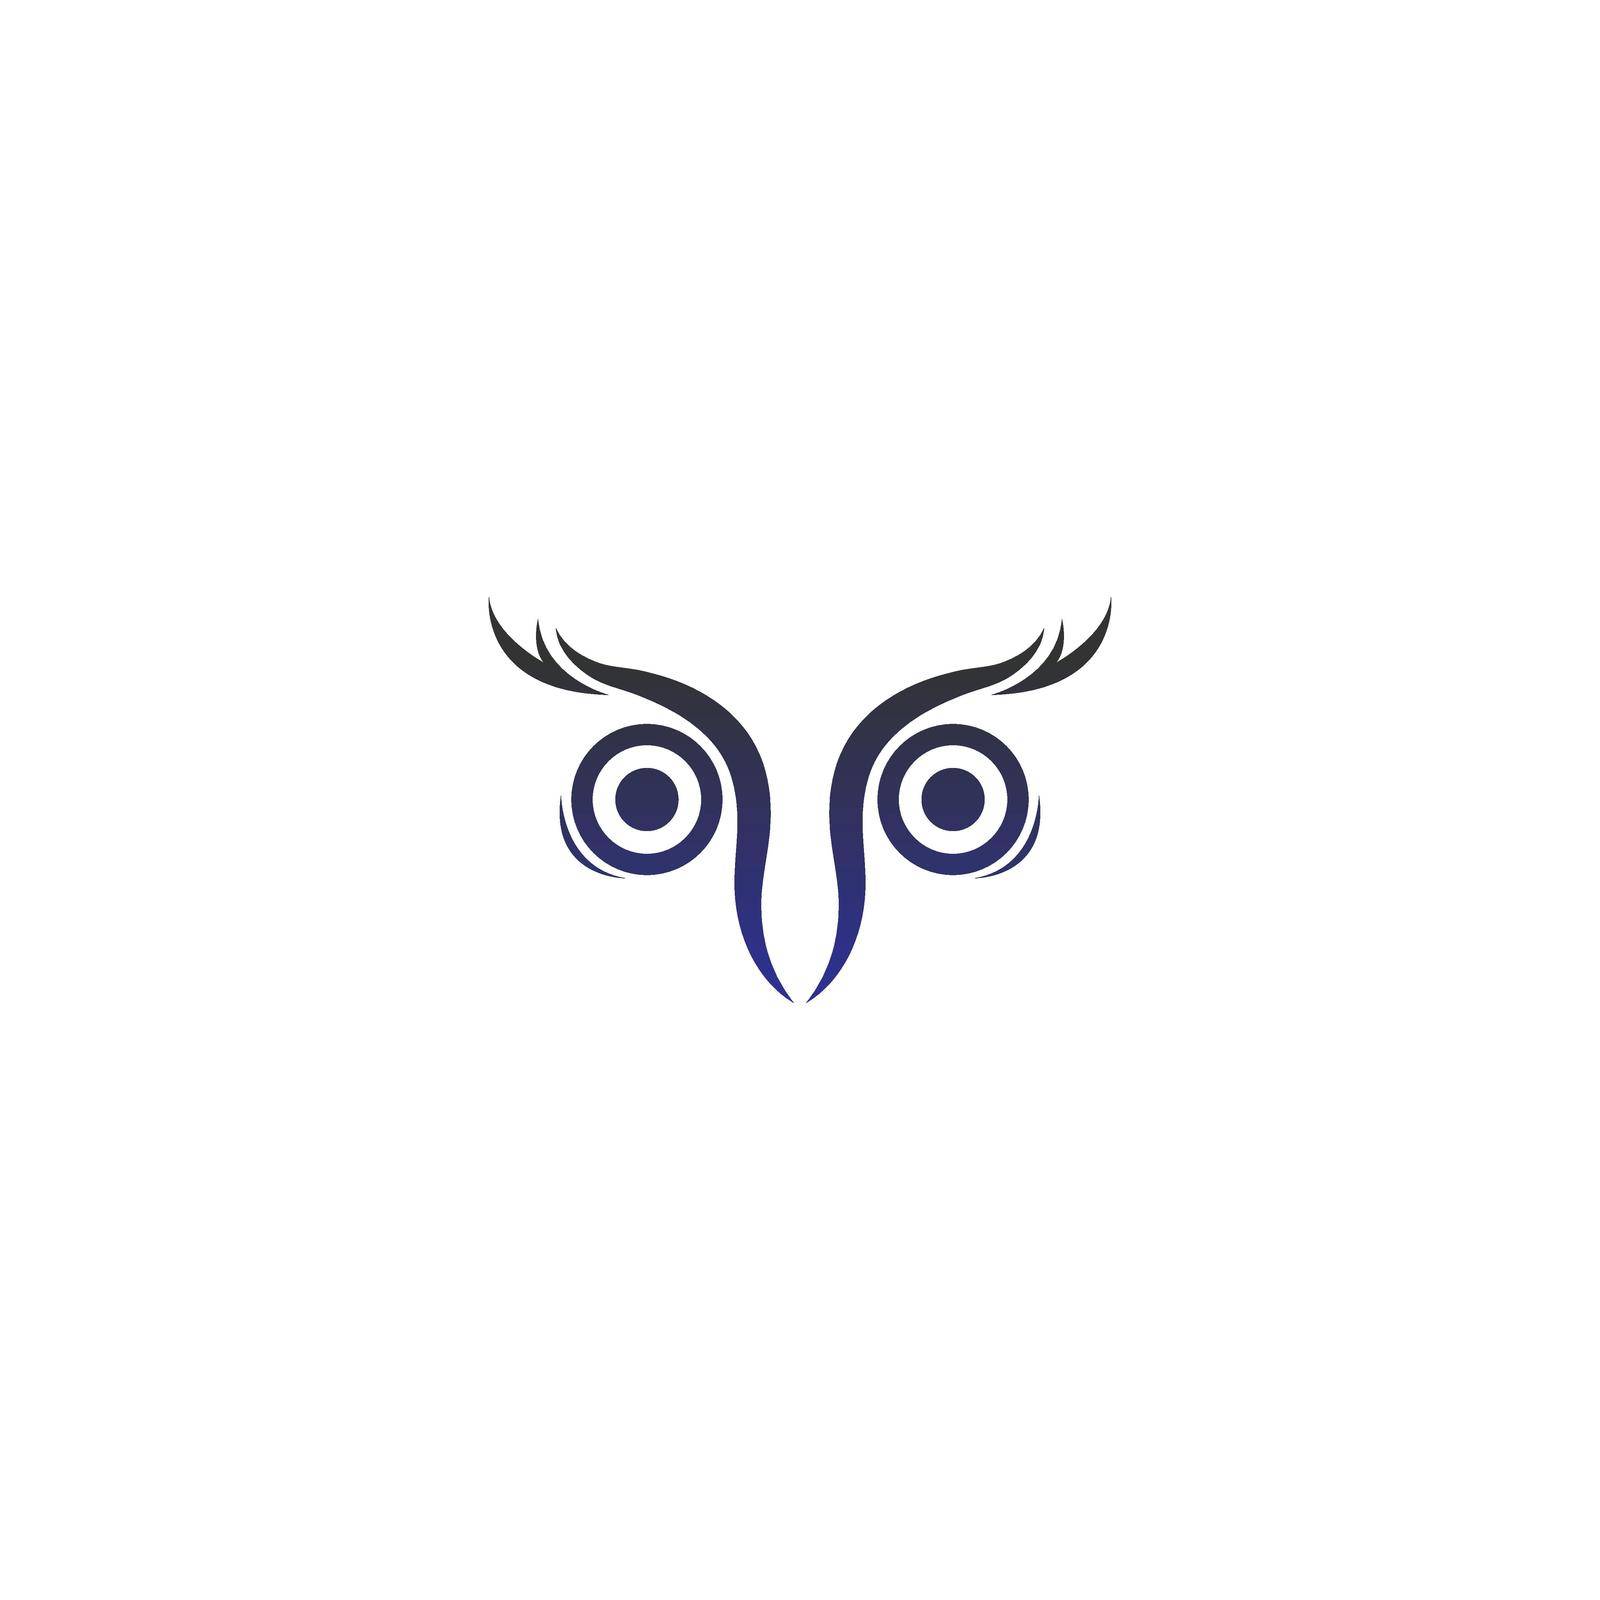 Owl logo vector icon design template by bellaxbudhong3